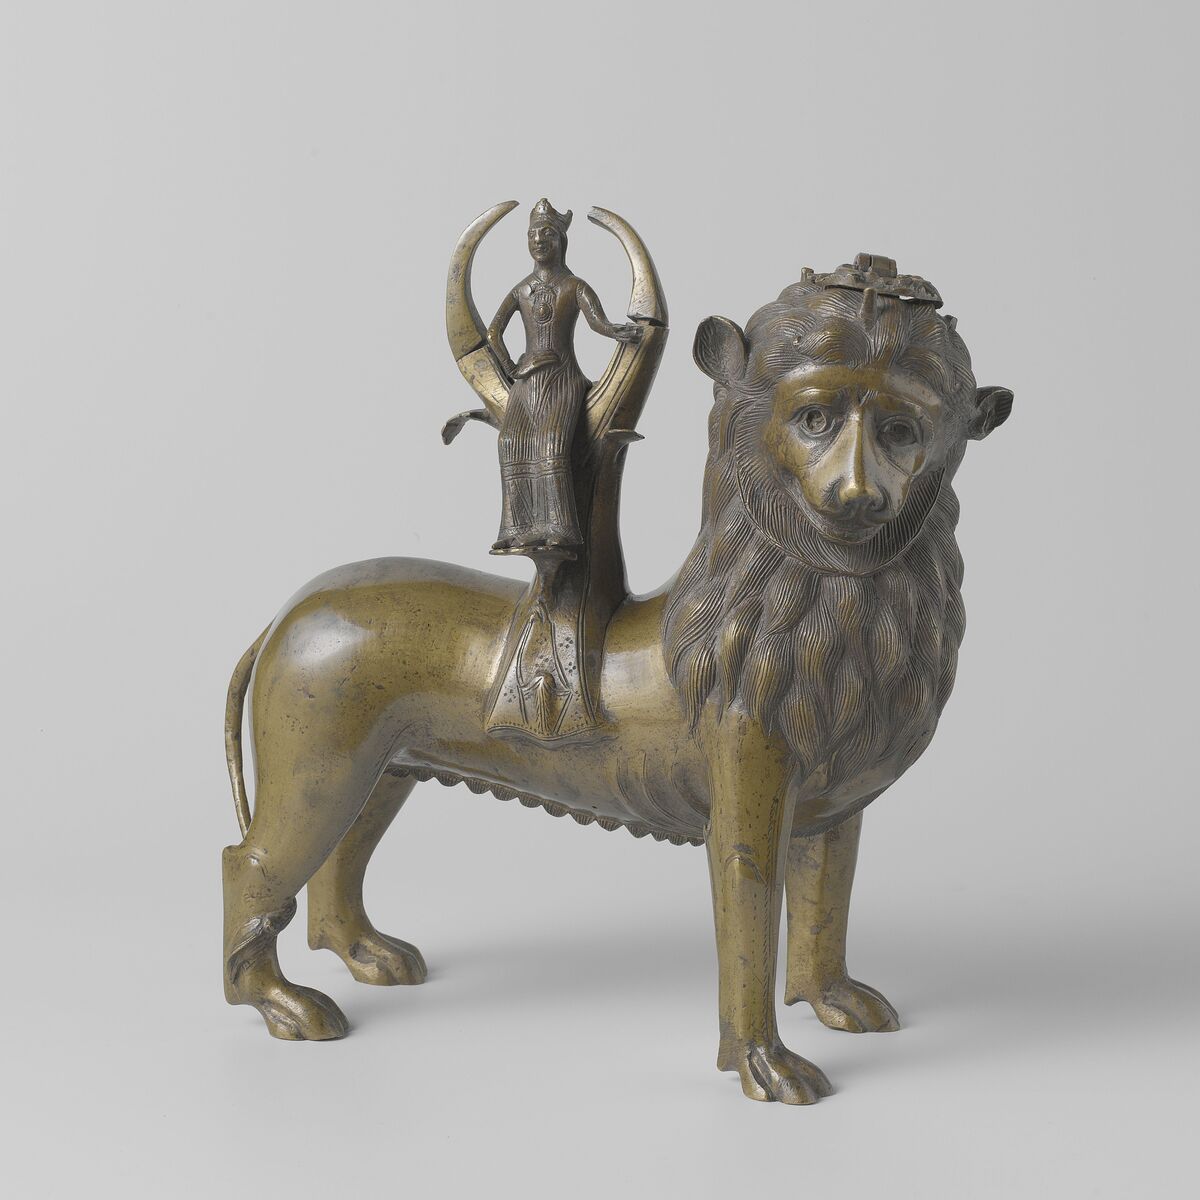 Aquamanile in the form of a lion with a mounted female figure ca. 1220–30. Courtesy of the Rijksmuseum.